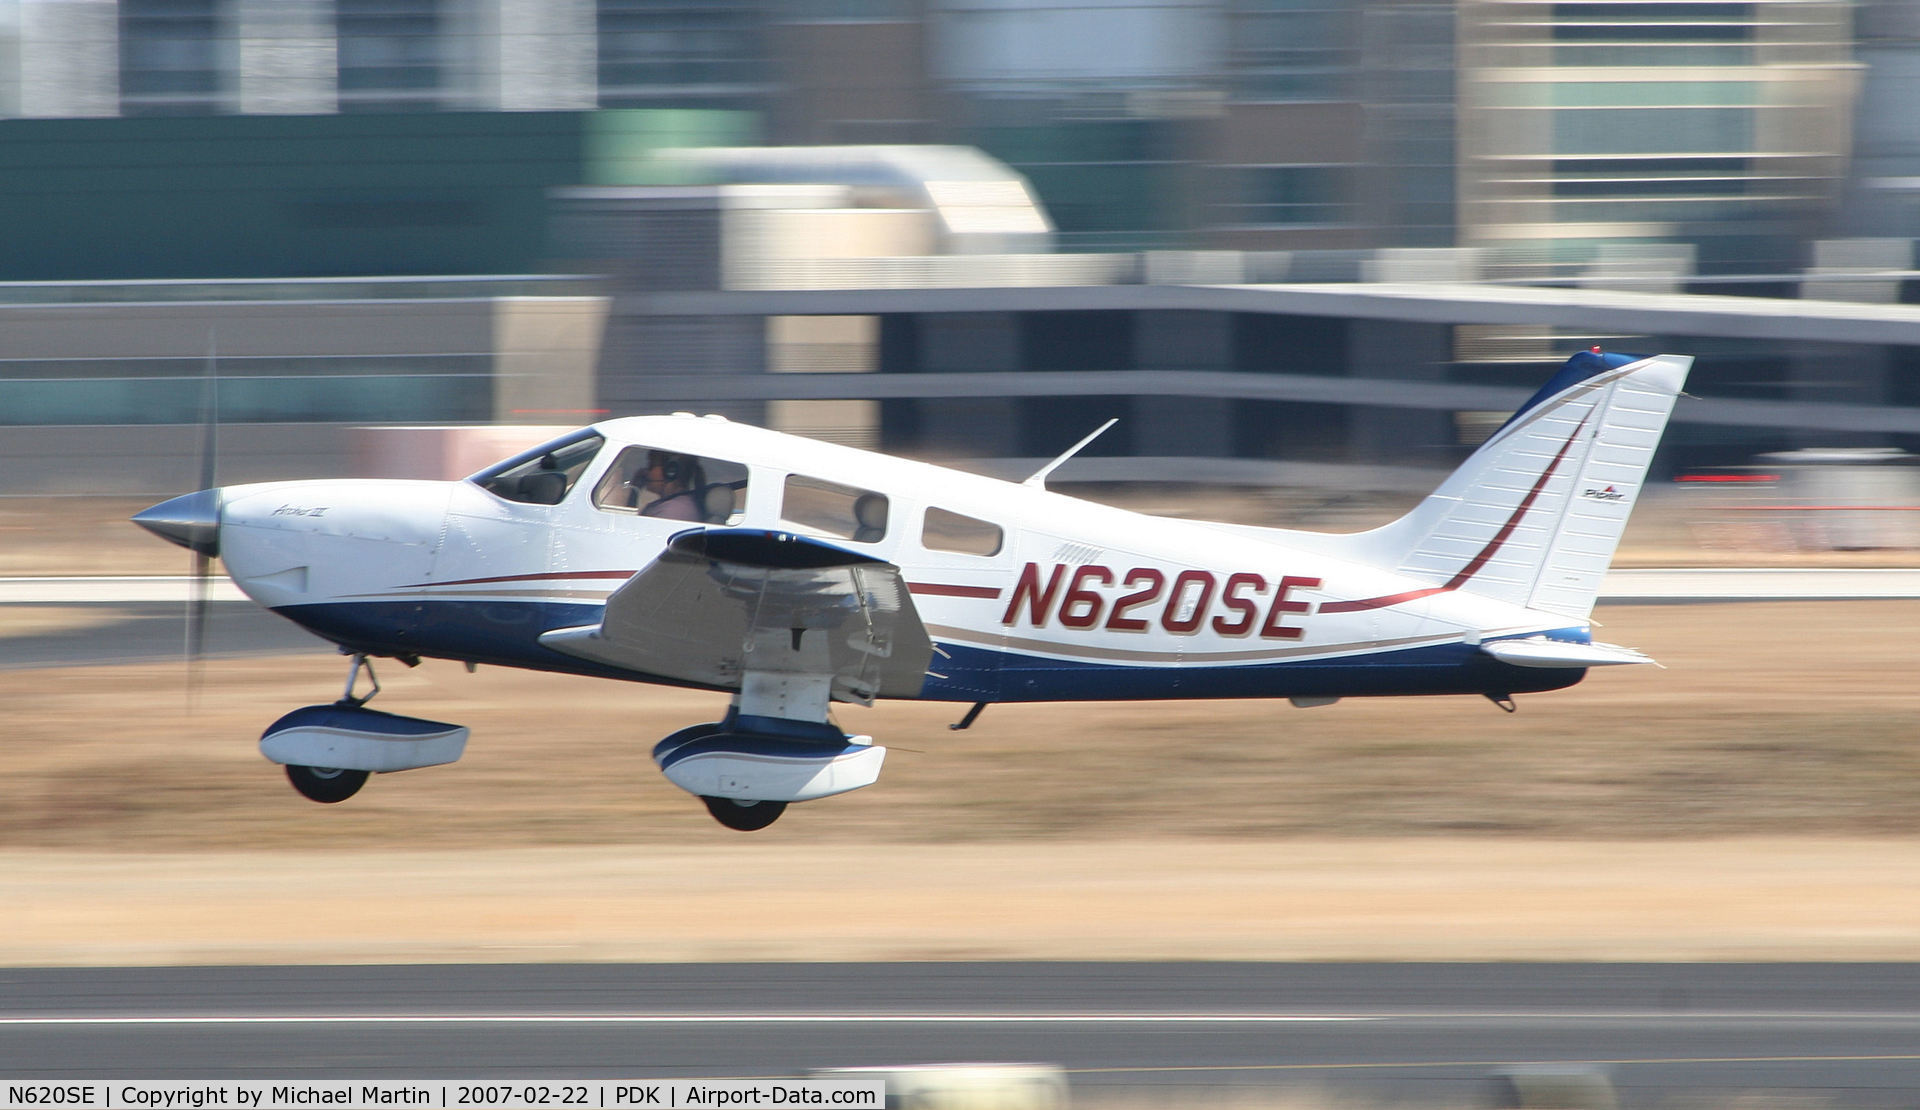 N620SE, 2005 Piper PA-28-181 C/N 2843620, Taking off from Runway 34